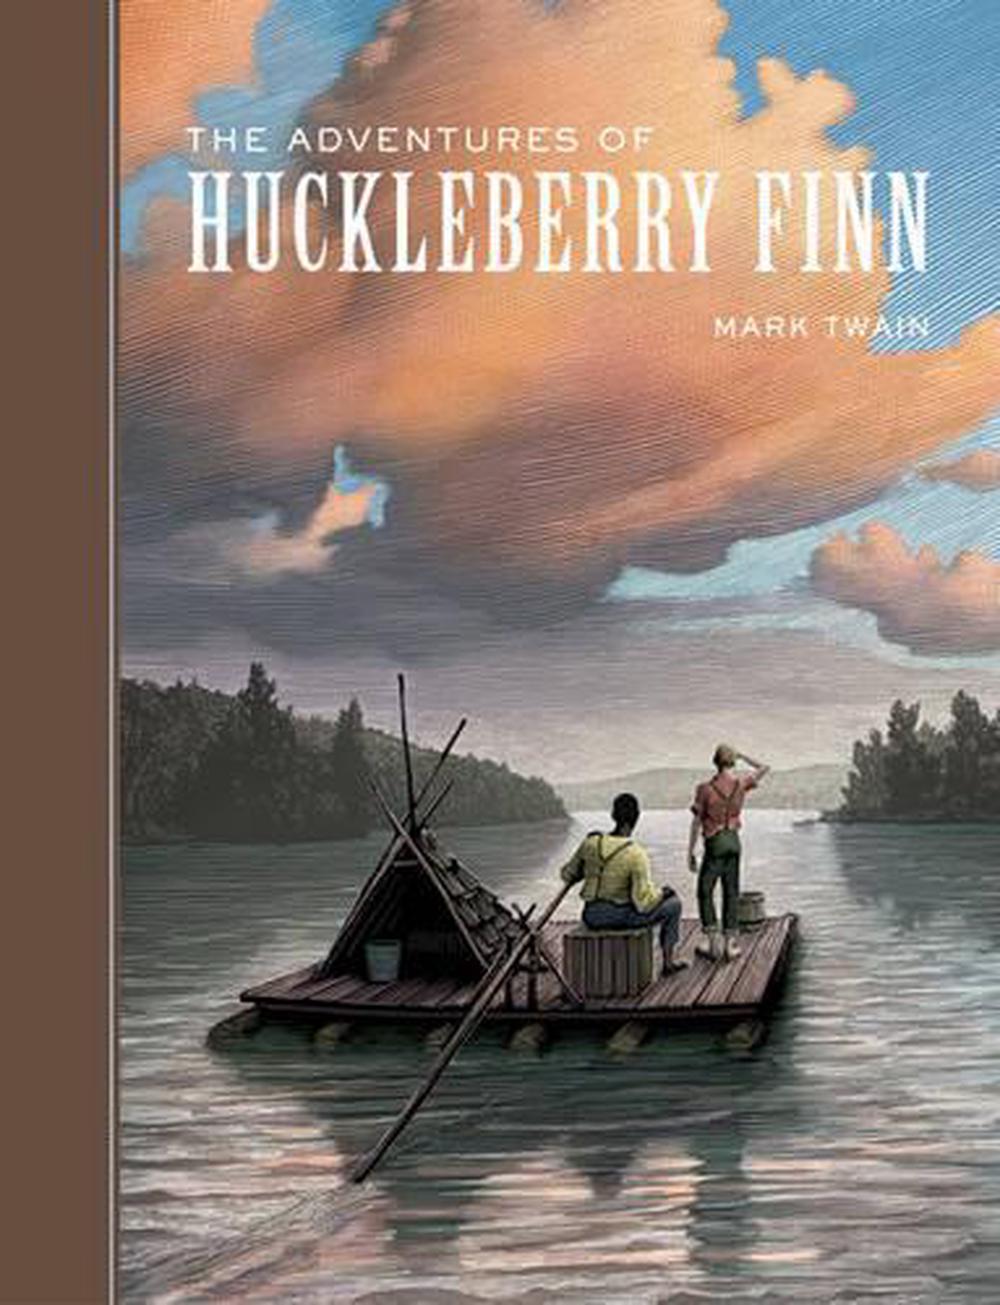 thesis statement for the adventures of huckleberry finn